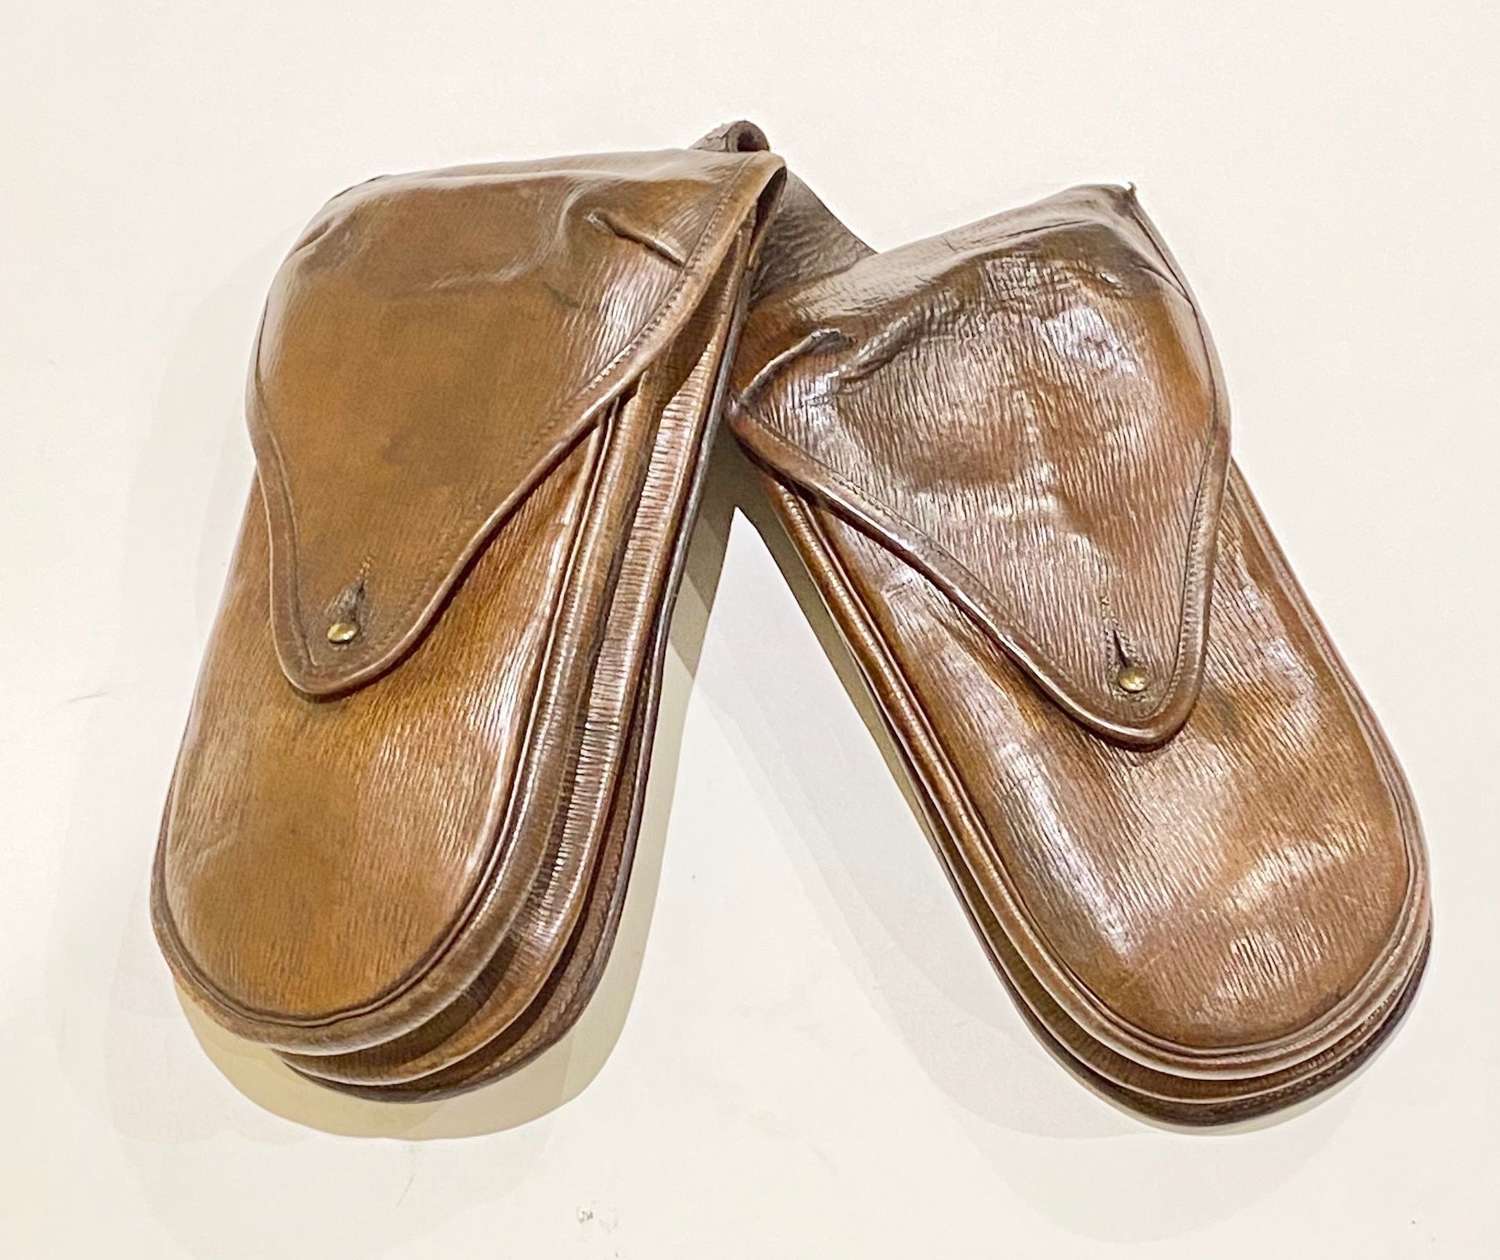 Boer War / WW1 Officer’s Leather Cavalry Saddle Pouches.